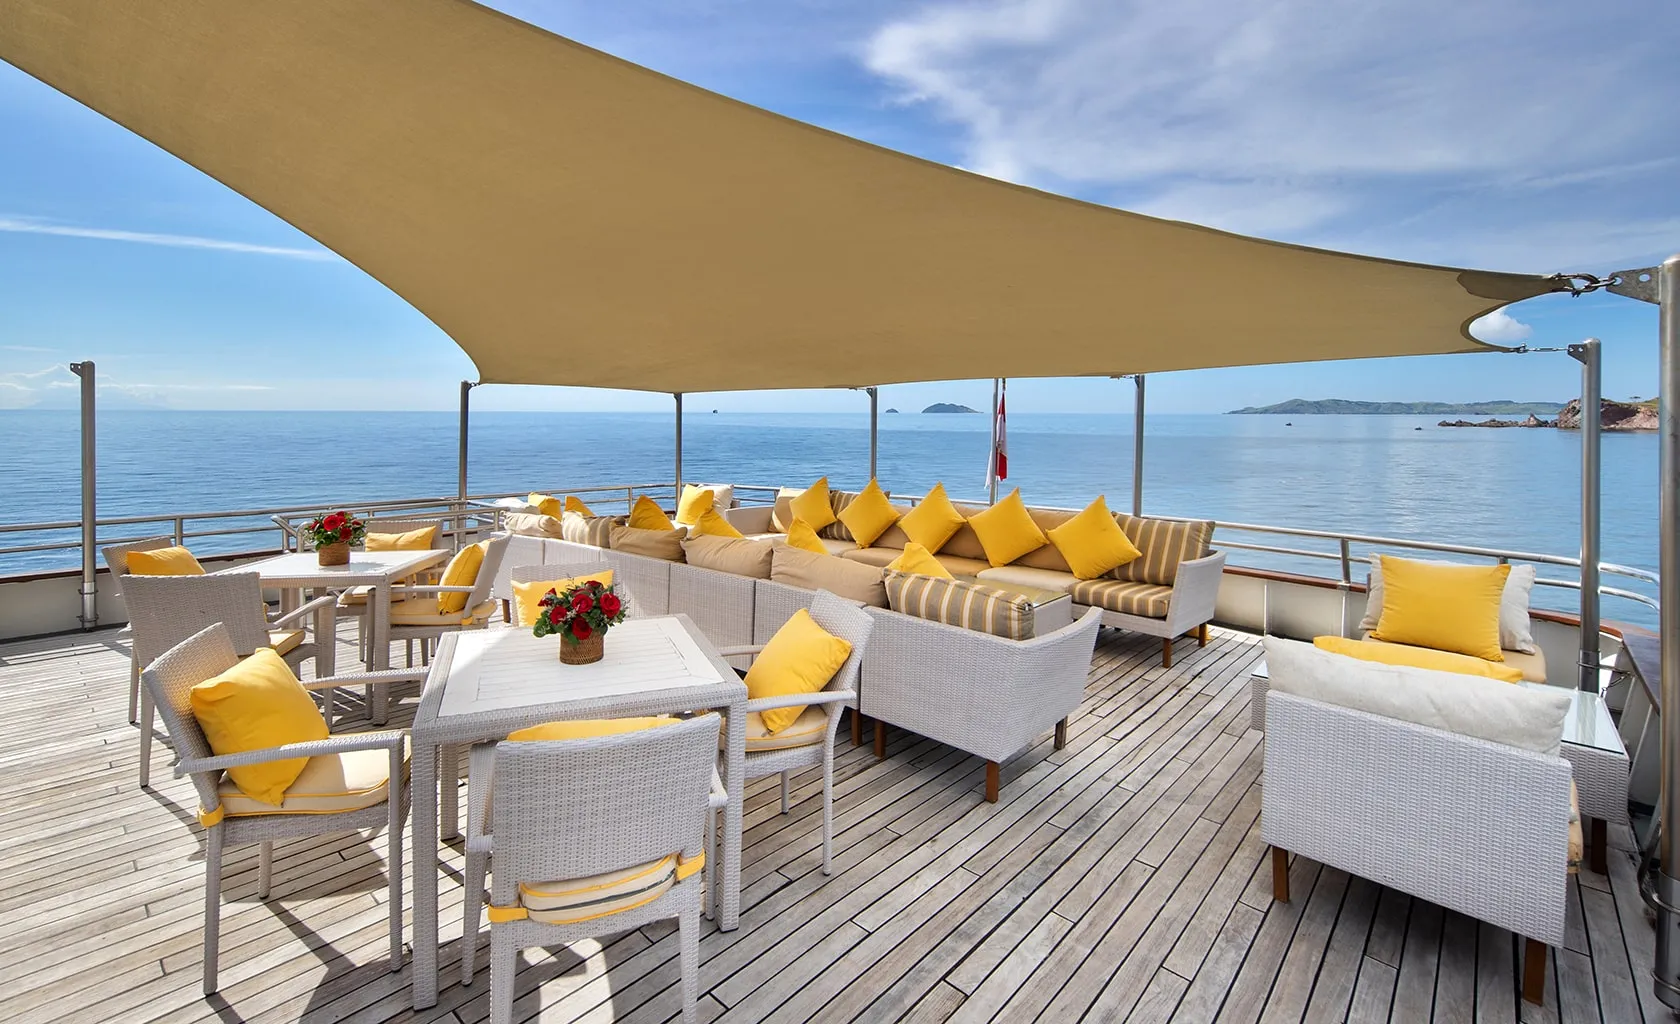 THE TRANS LUXURY YACHT Outdoor dining area